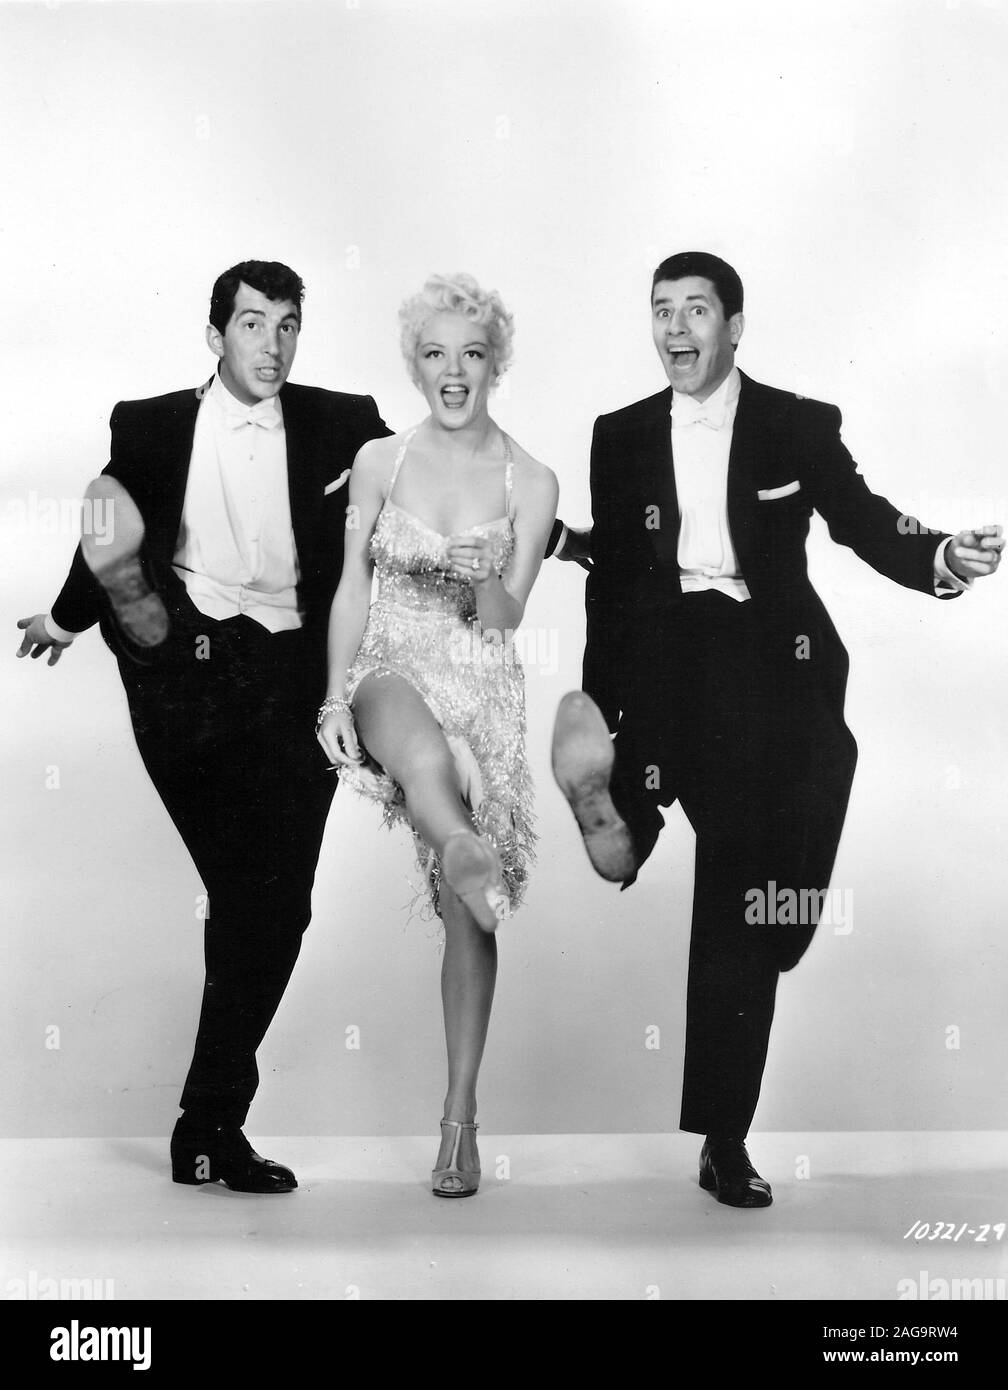 JERRY LEWIS, DEAN MARTIN and SHEREE NORTH in LIVING IT UP (1954), directed by NORMAN TAUROG. Credit: PARAMOUNT PICTURES / Album Stock Photo